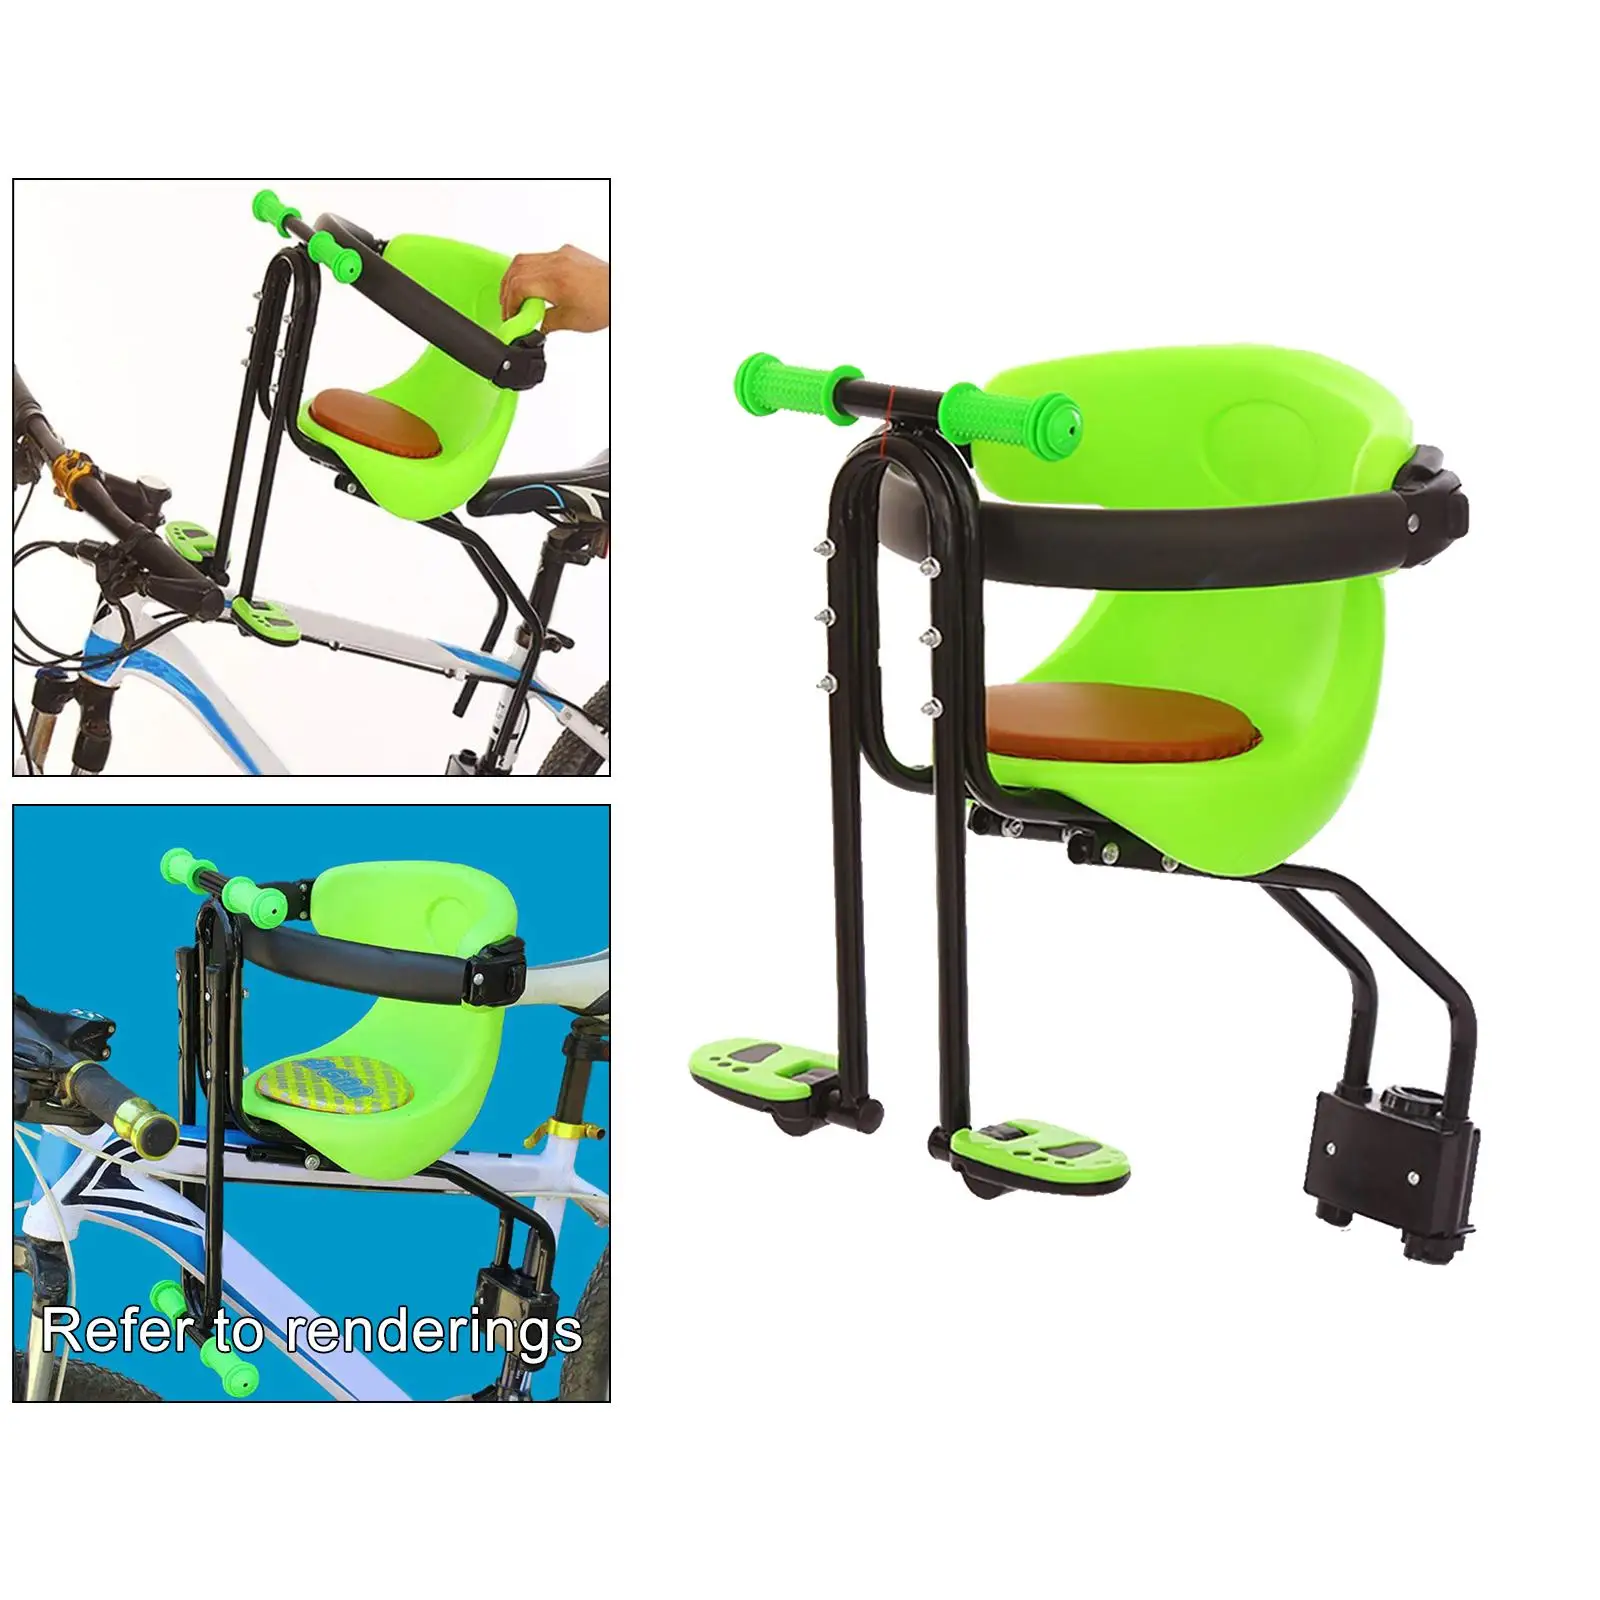 Bike Bicycle Safety Baby Kids Child Seat Saddle Front Carrier with Handrail